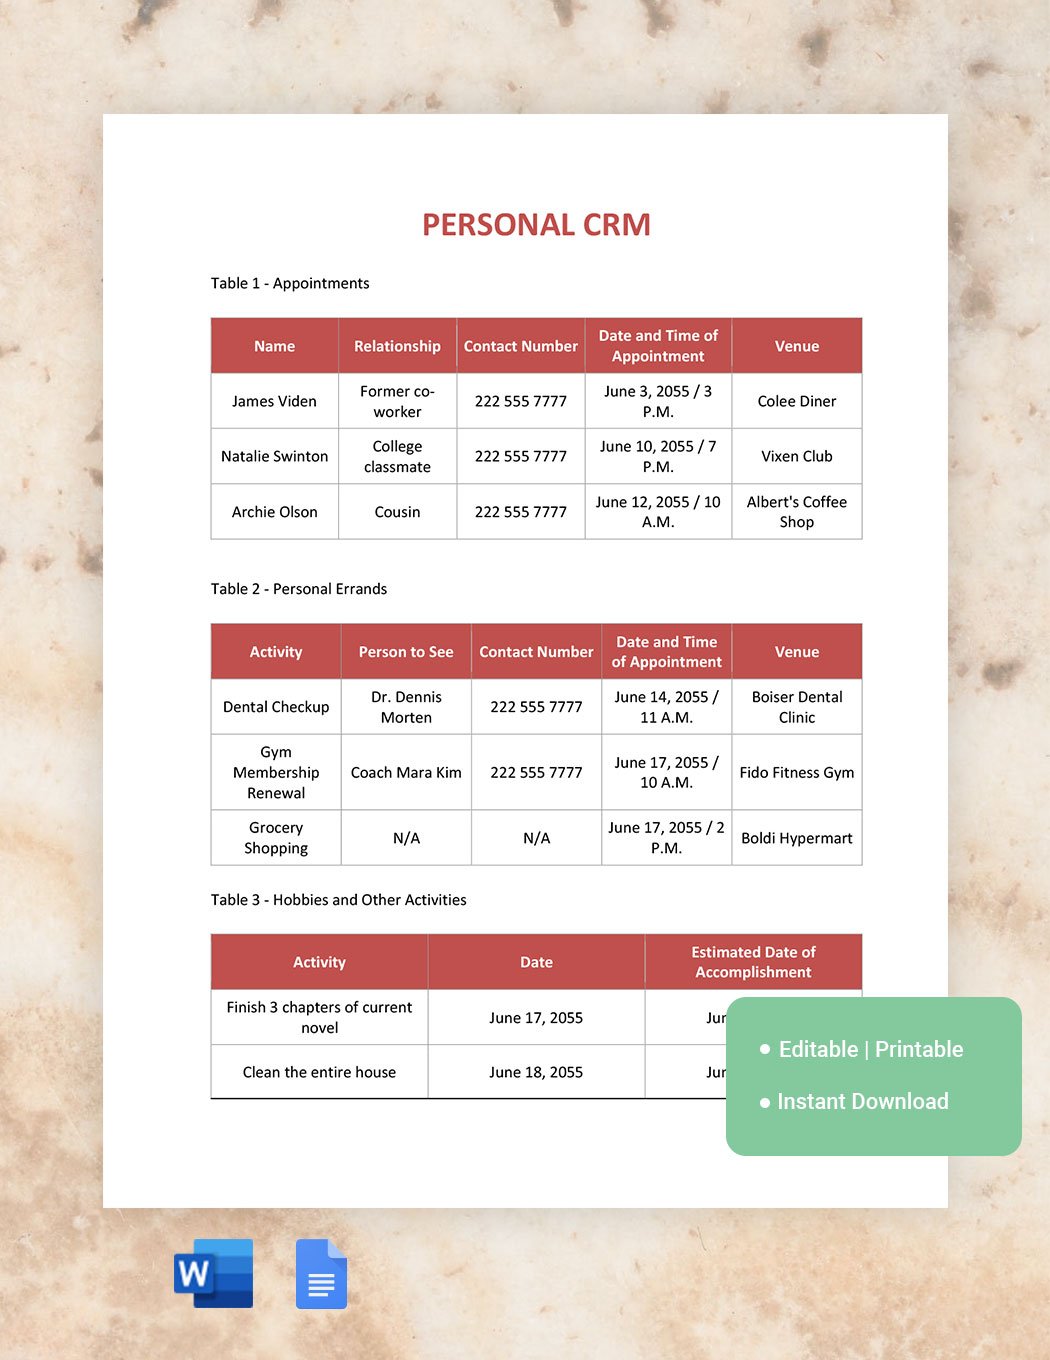 Personal CRM Template in Word, Google Docs